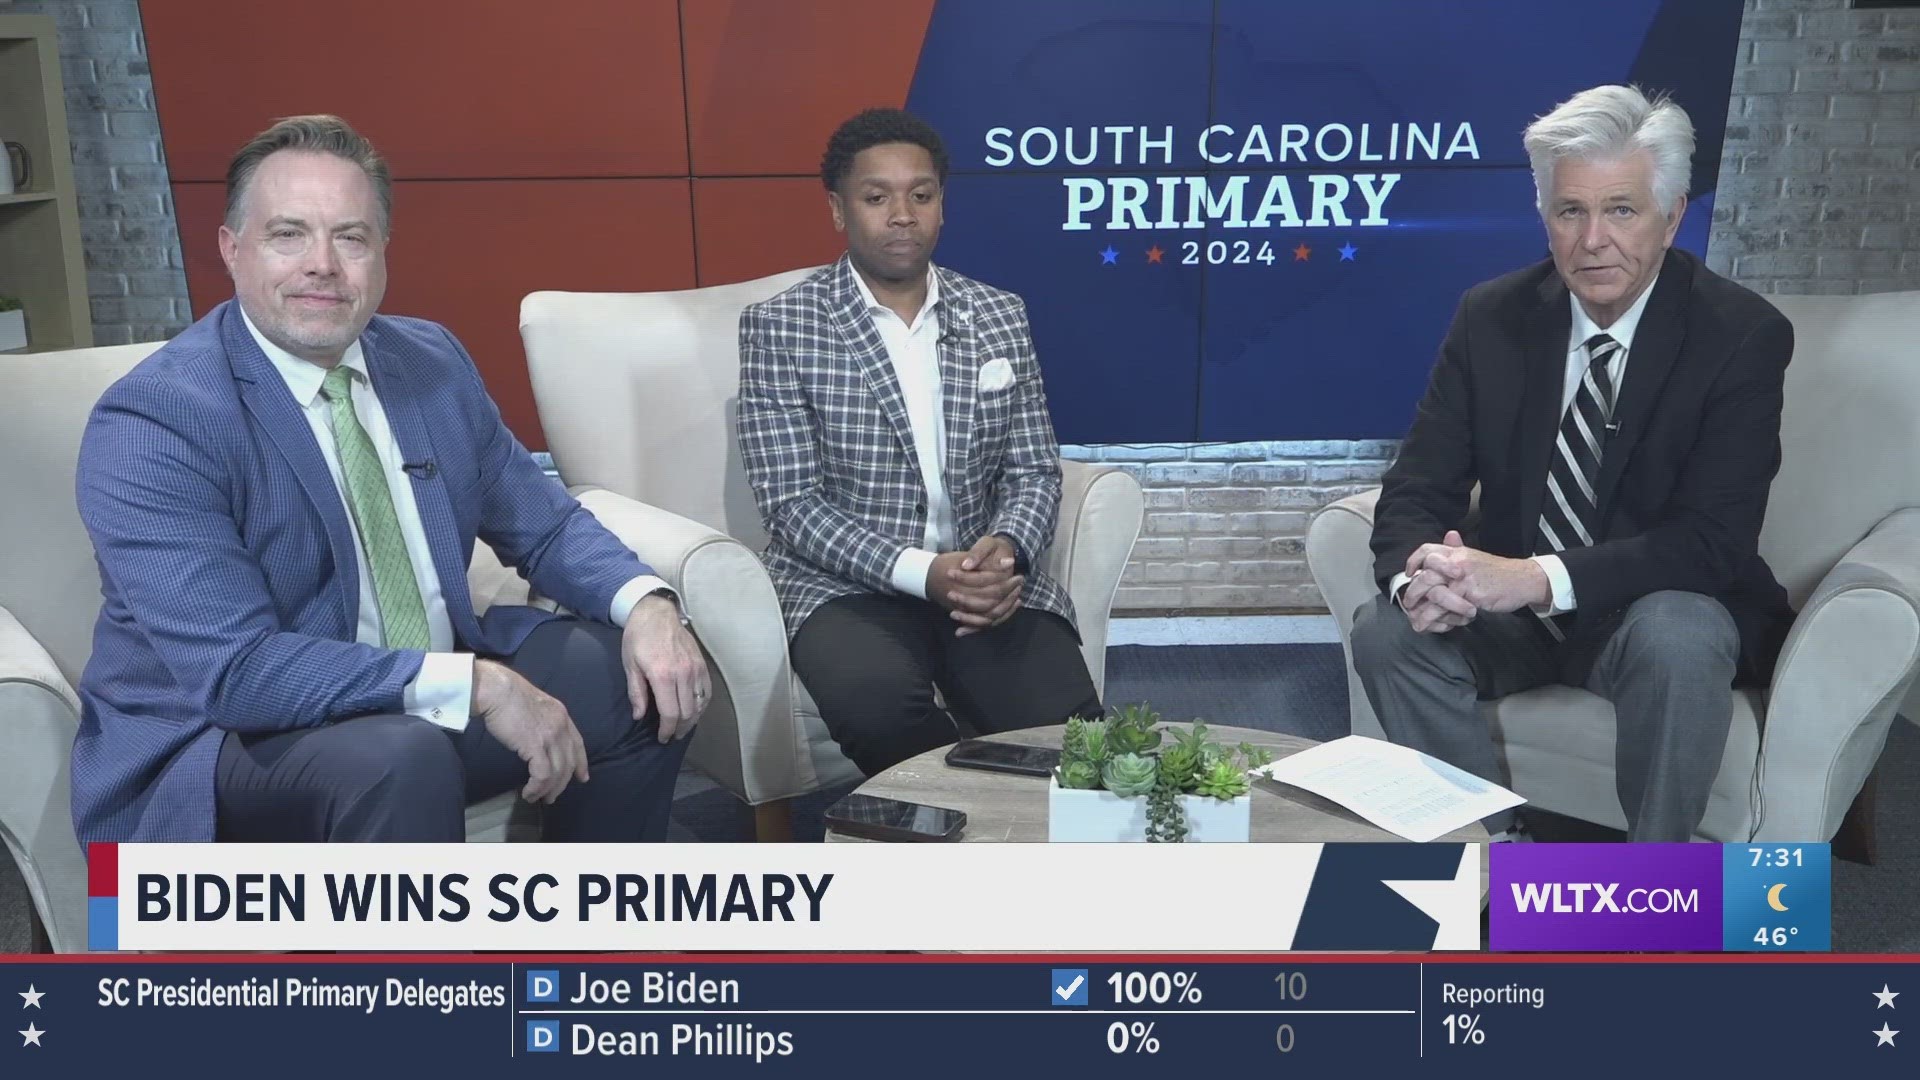 Antuan Seawright and Dave Wilson give opinions as to what President Biden's win in South Carolina means to the national campaign